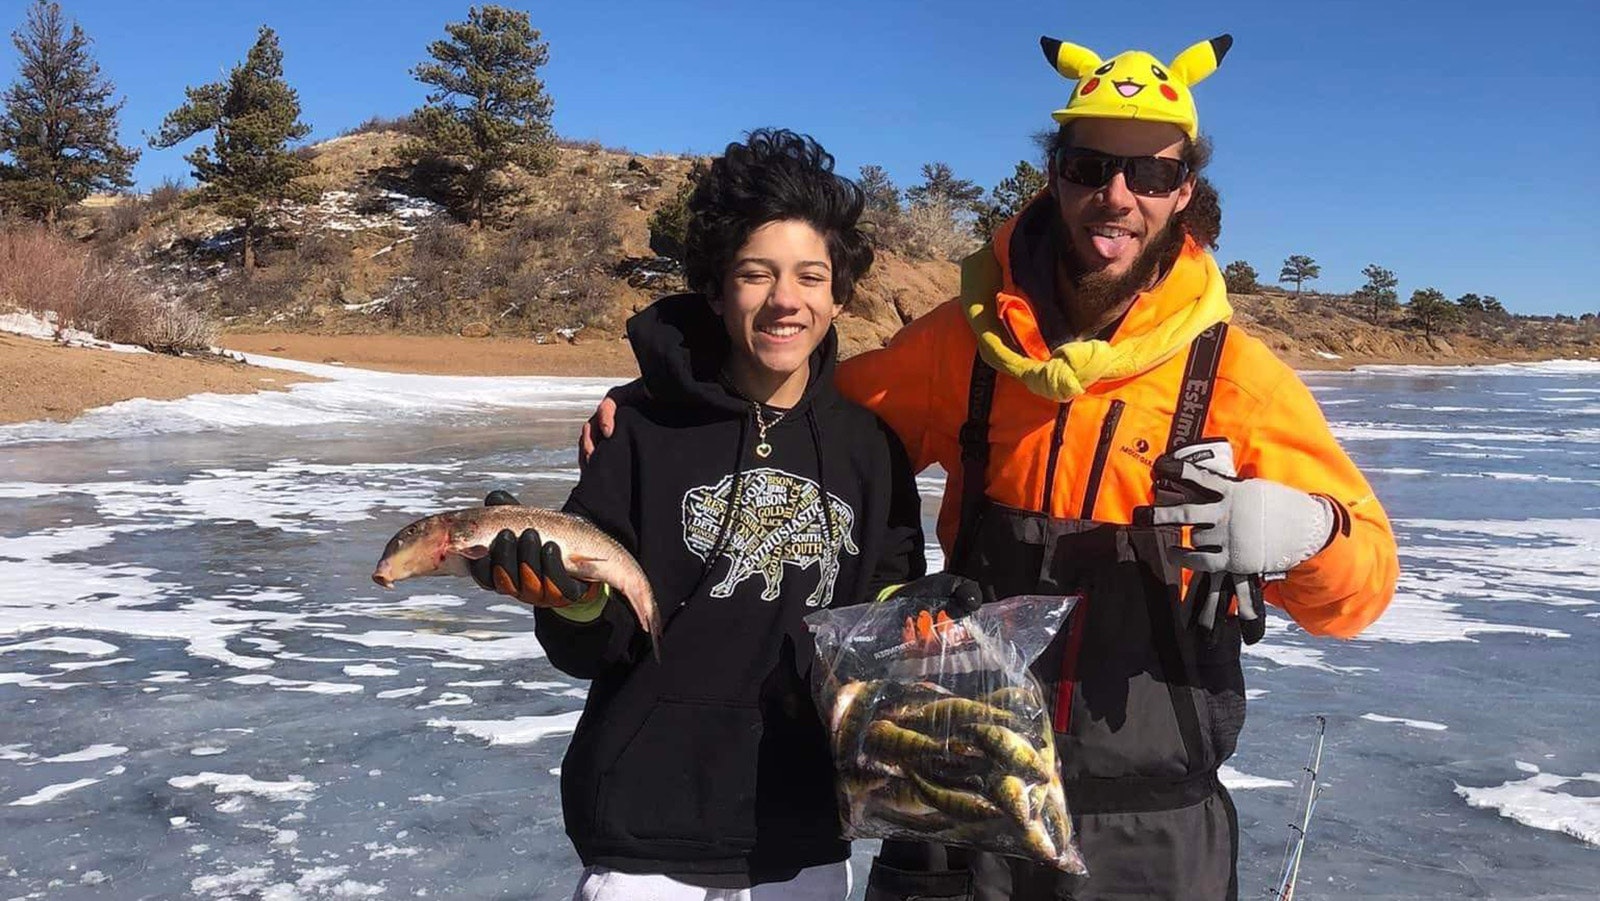 Angel Smith, also known as Everyday Pikachu Hat Fisherman, shares his love of ice fishing in Wyoming on his YouTube channel.